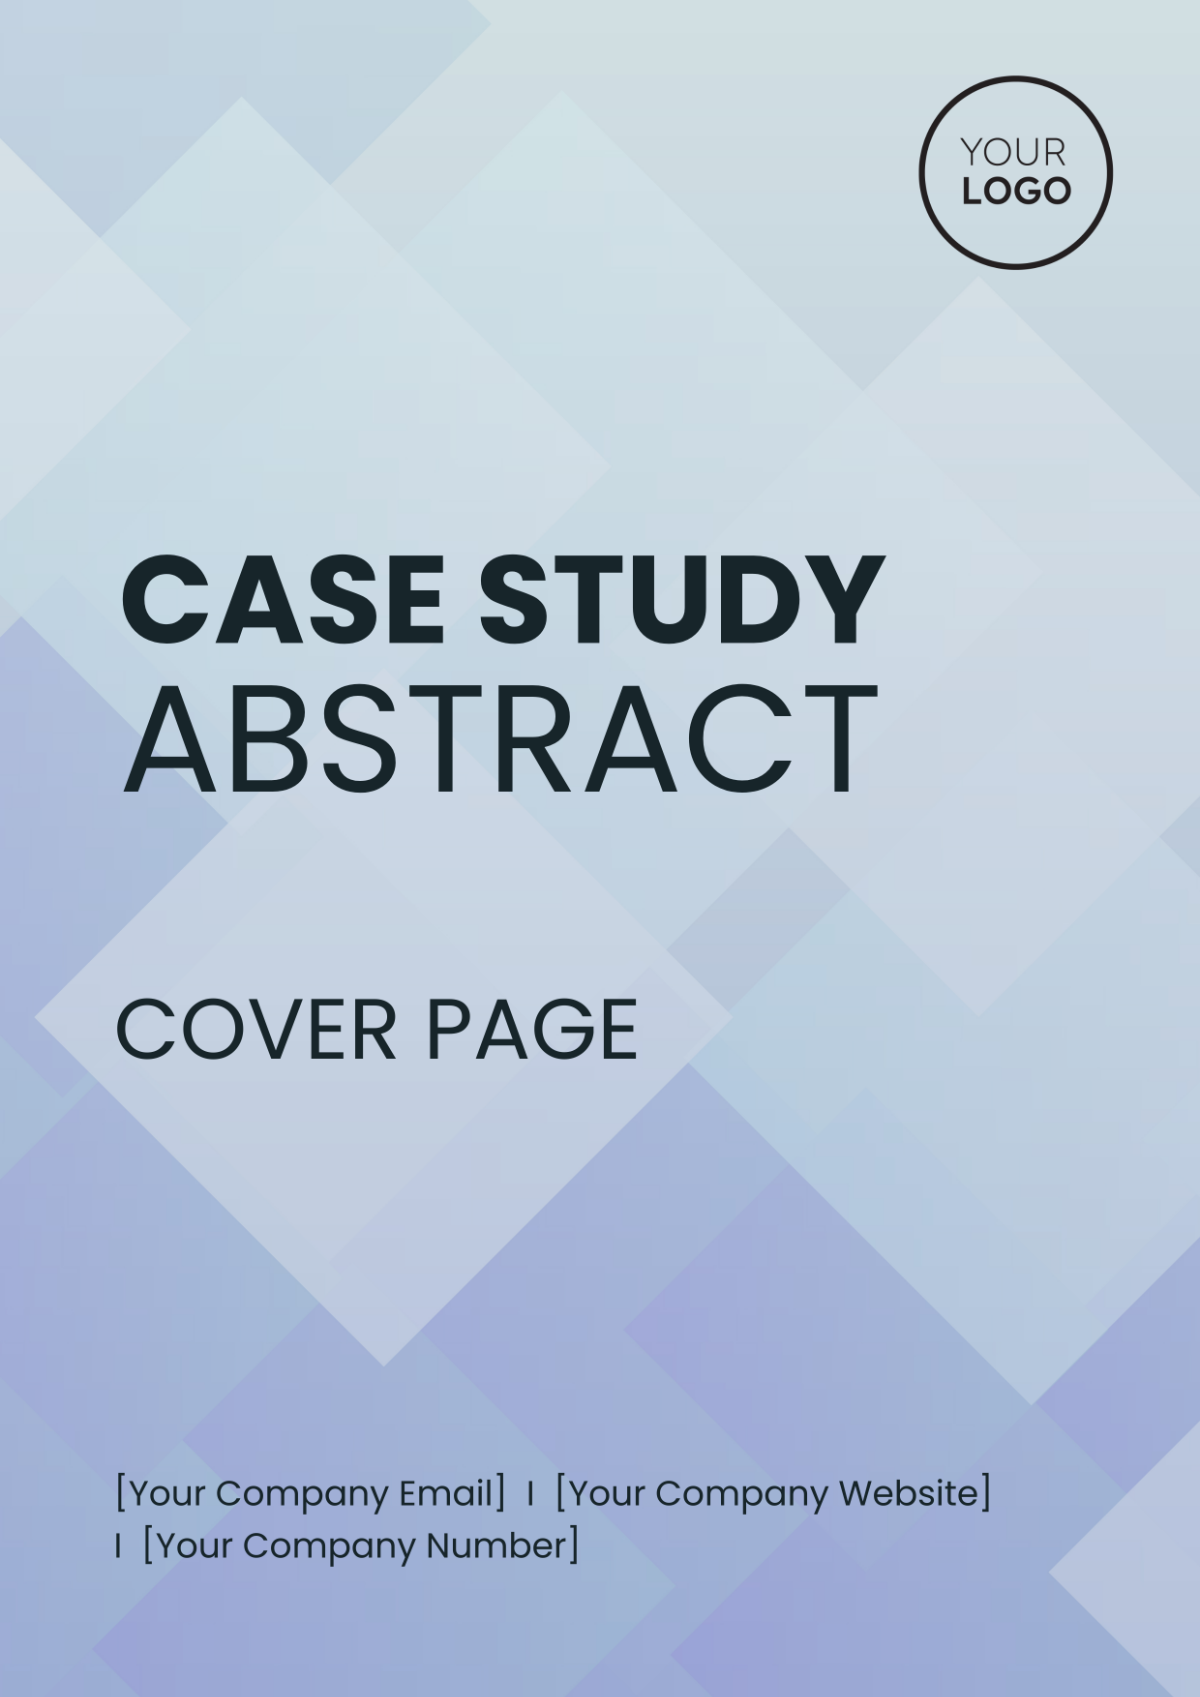 Case Study Abstract Cover Page